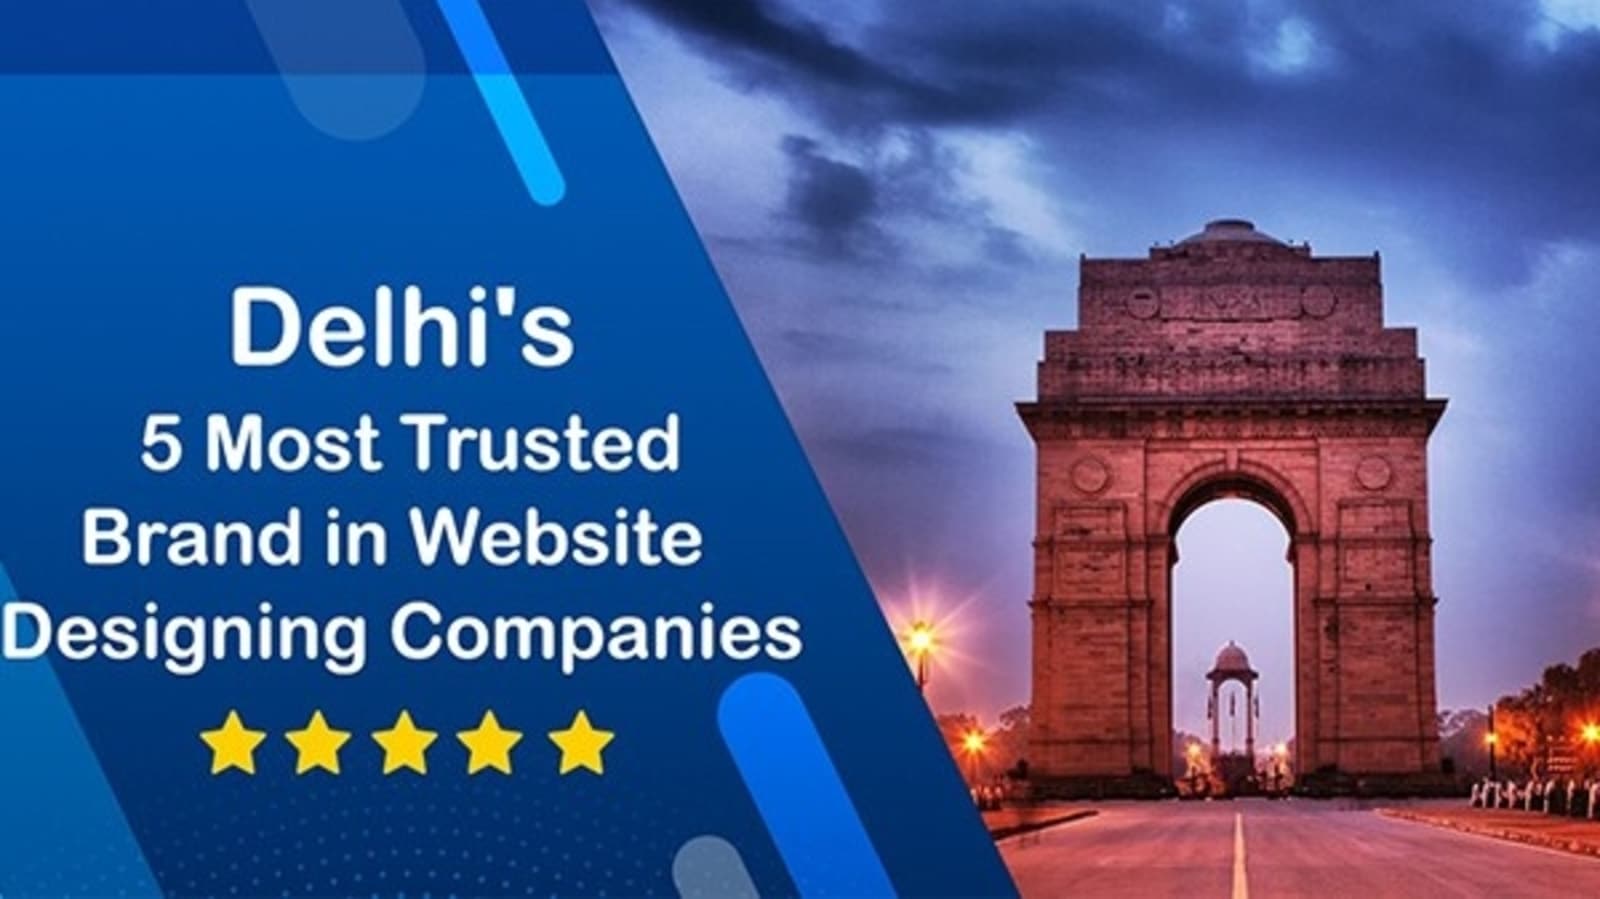 Delhi’s 5 Most Trusted Brand in Website Designing Companies